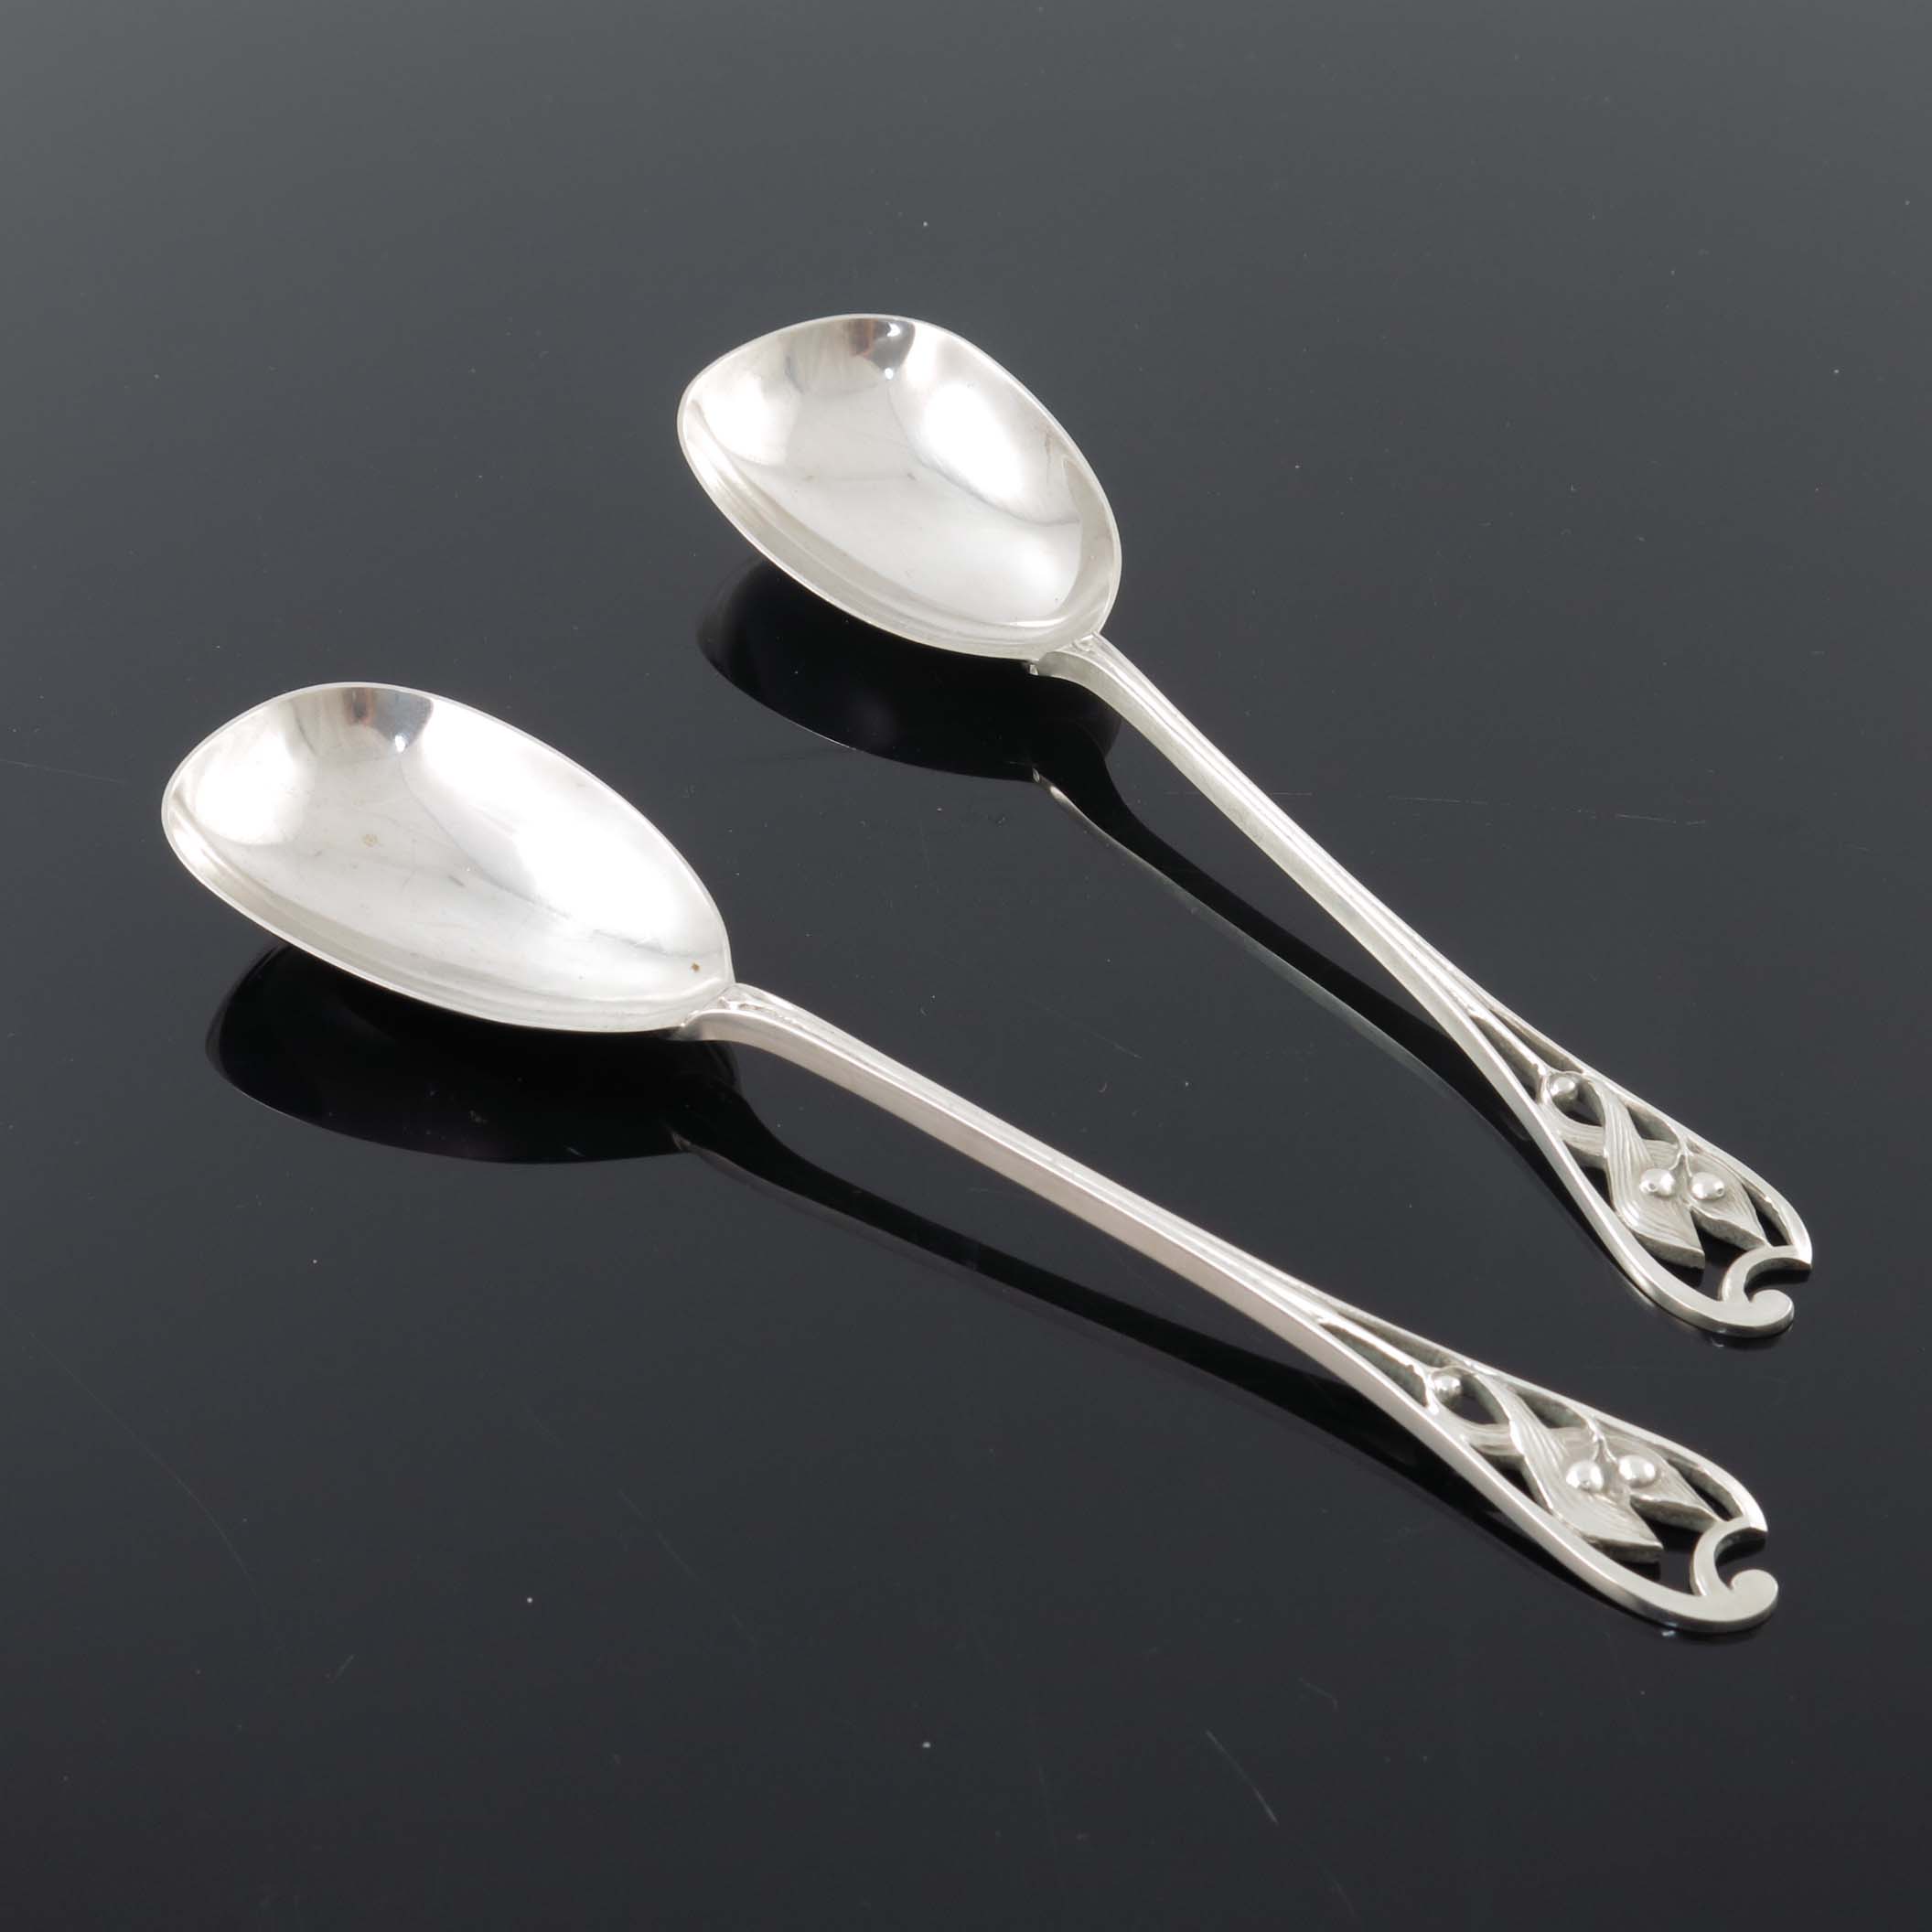 Kate Harris for William Hutton, a pair of Arts and Crafts silver serving spoons, London 1901, the